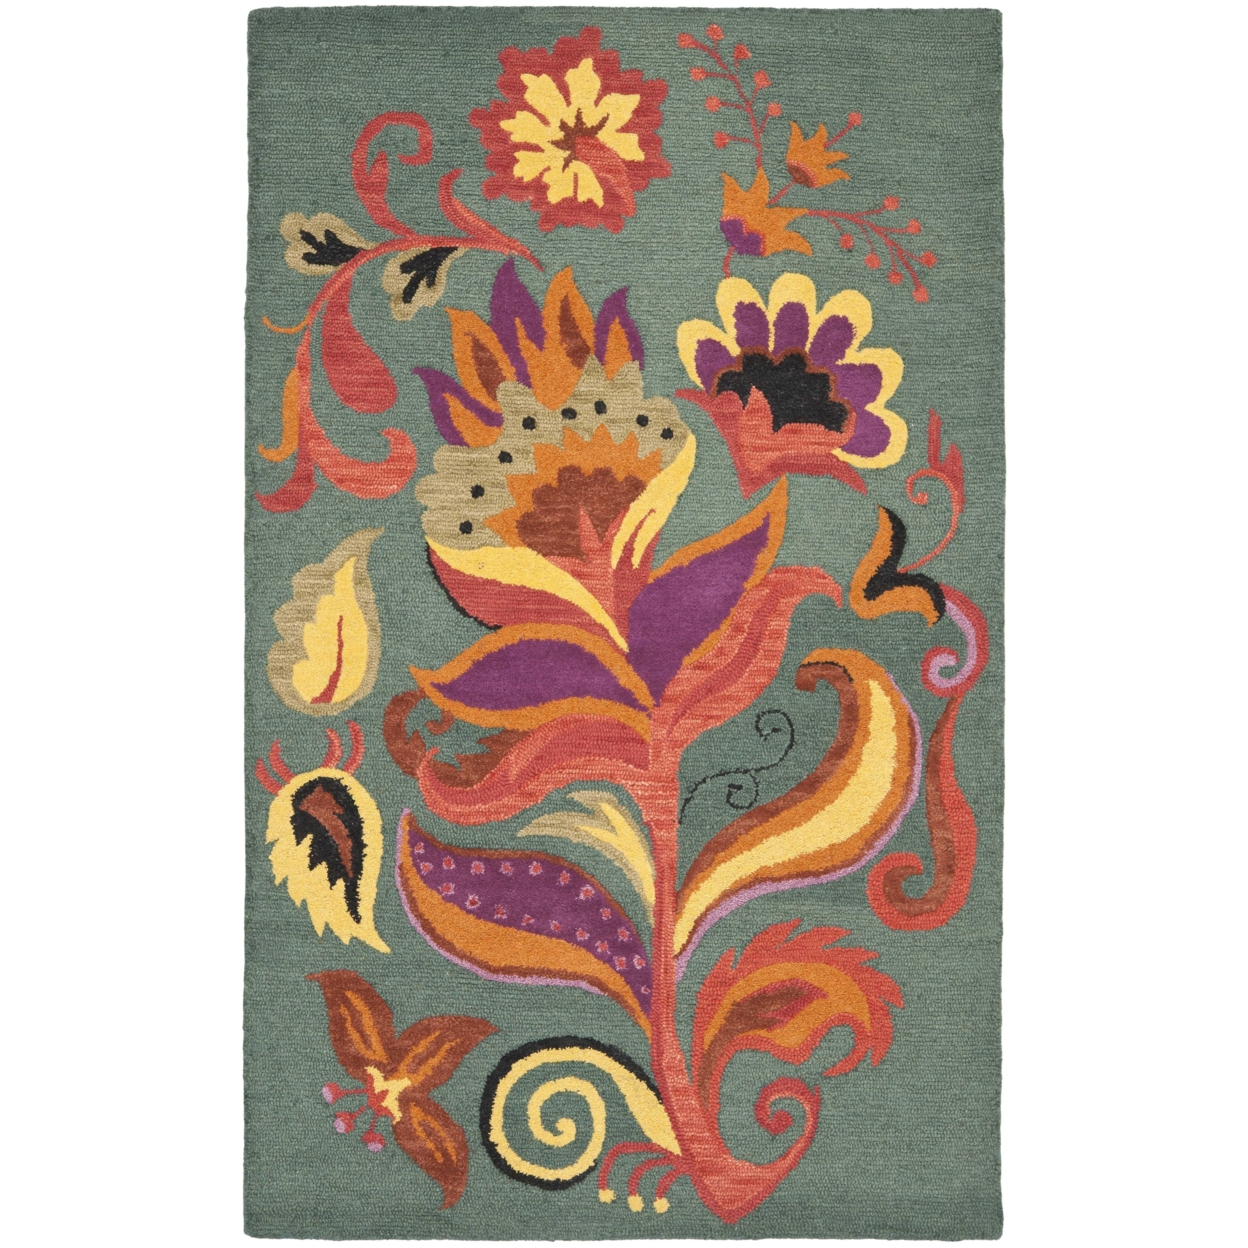 SAFAVIEH Blossom BLM679A Hand-hooked Blue / Multi Rug - 5' X 8'